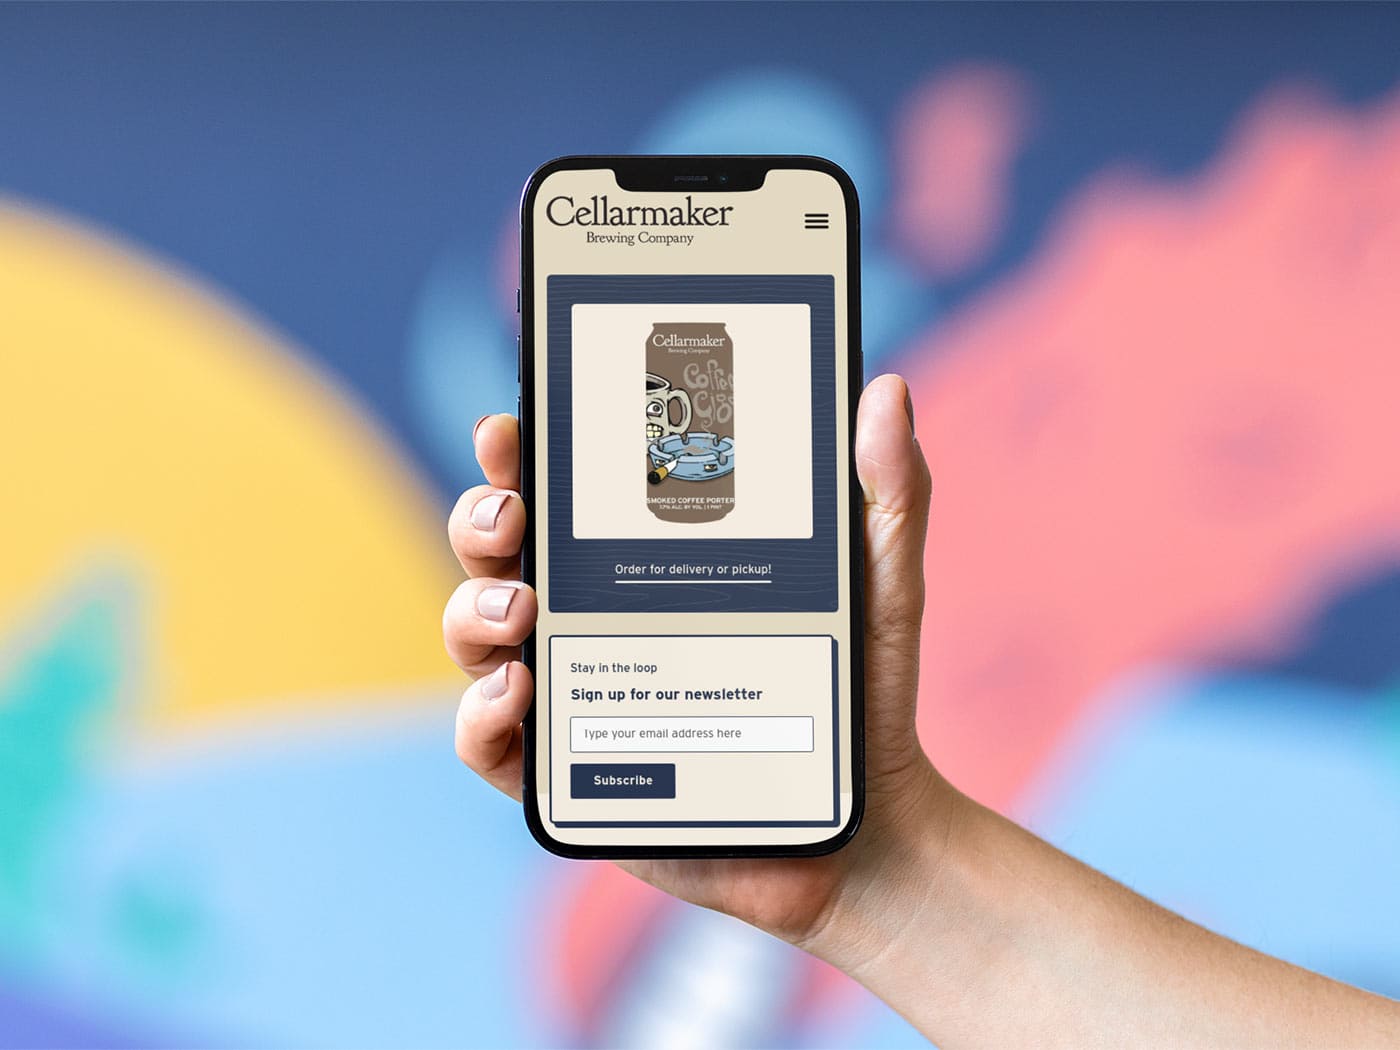 Cellarmaker Brewing Company 2023 Viewed on an iPhone